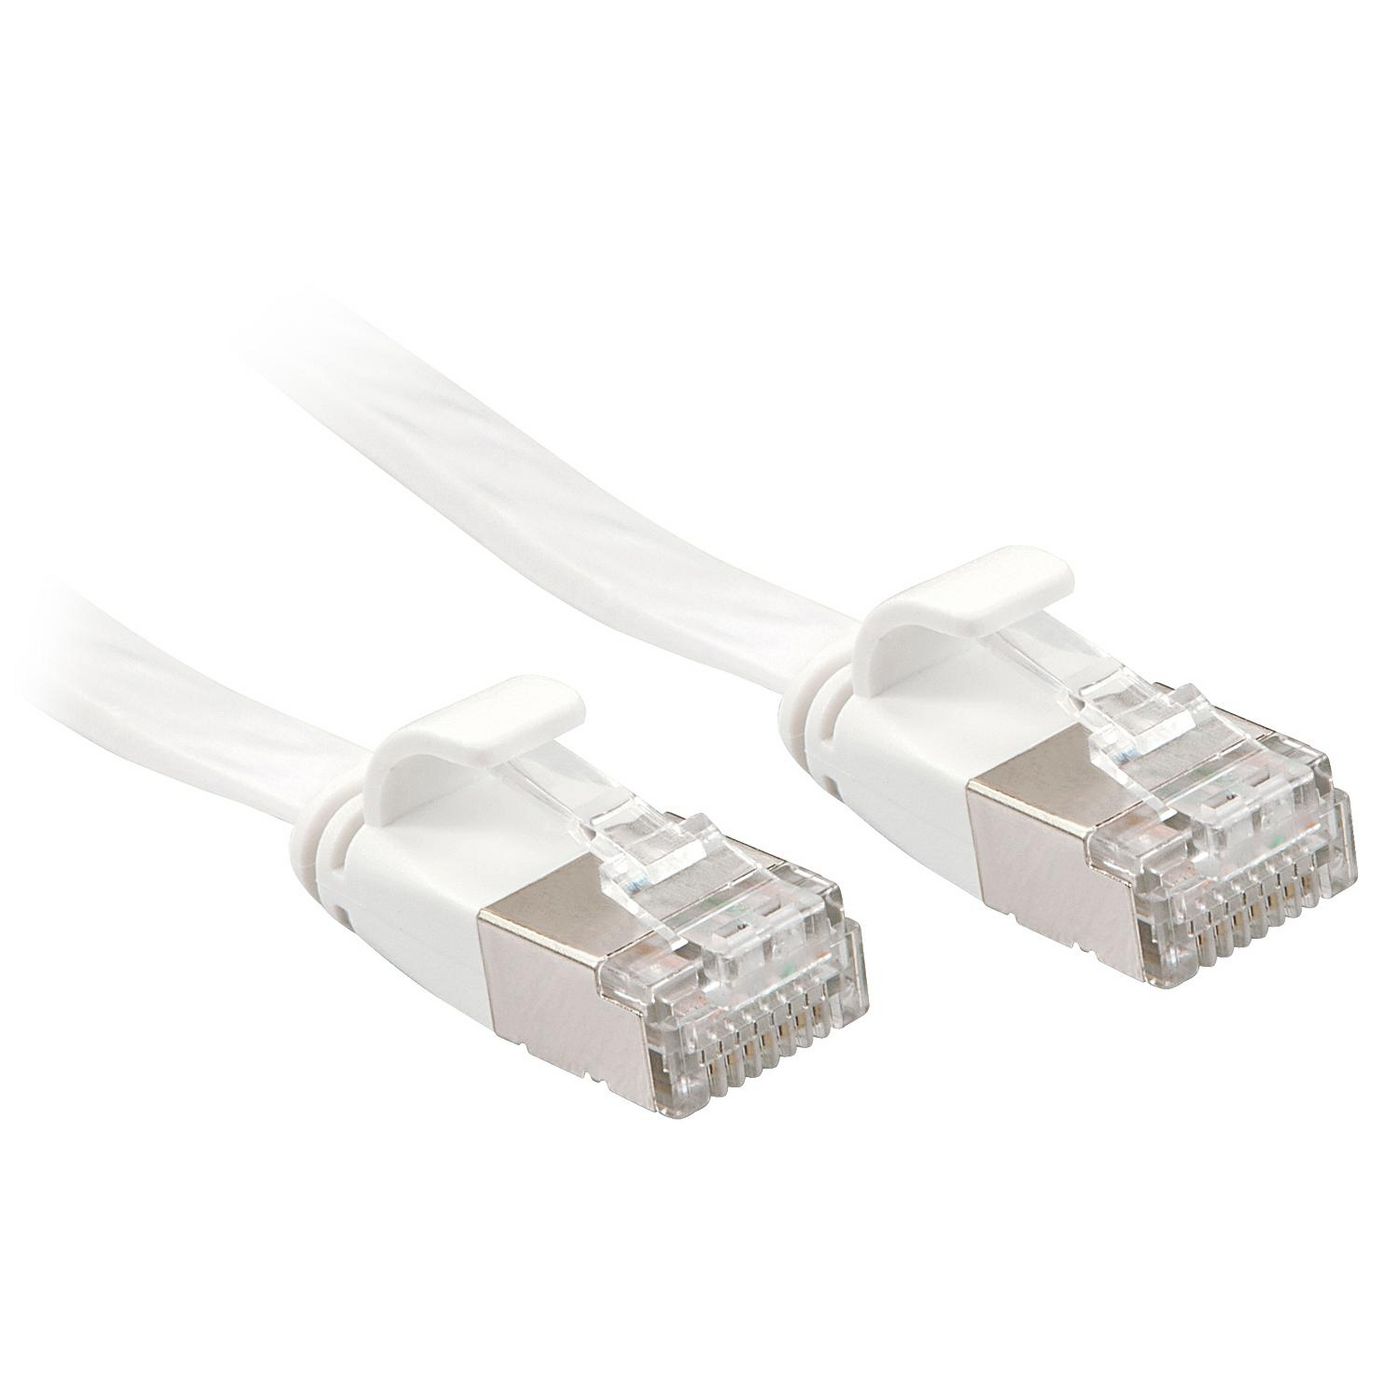 Lindy 47543 W128371004 Networking Cable White 3 M 